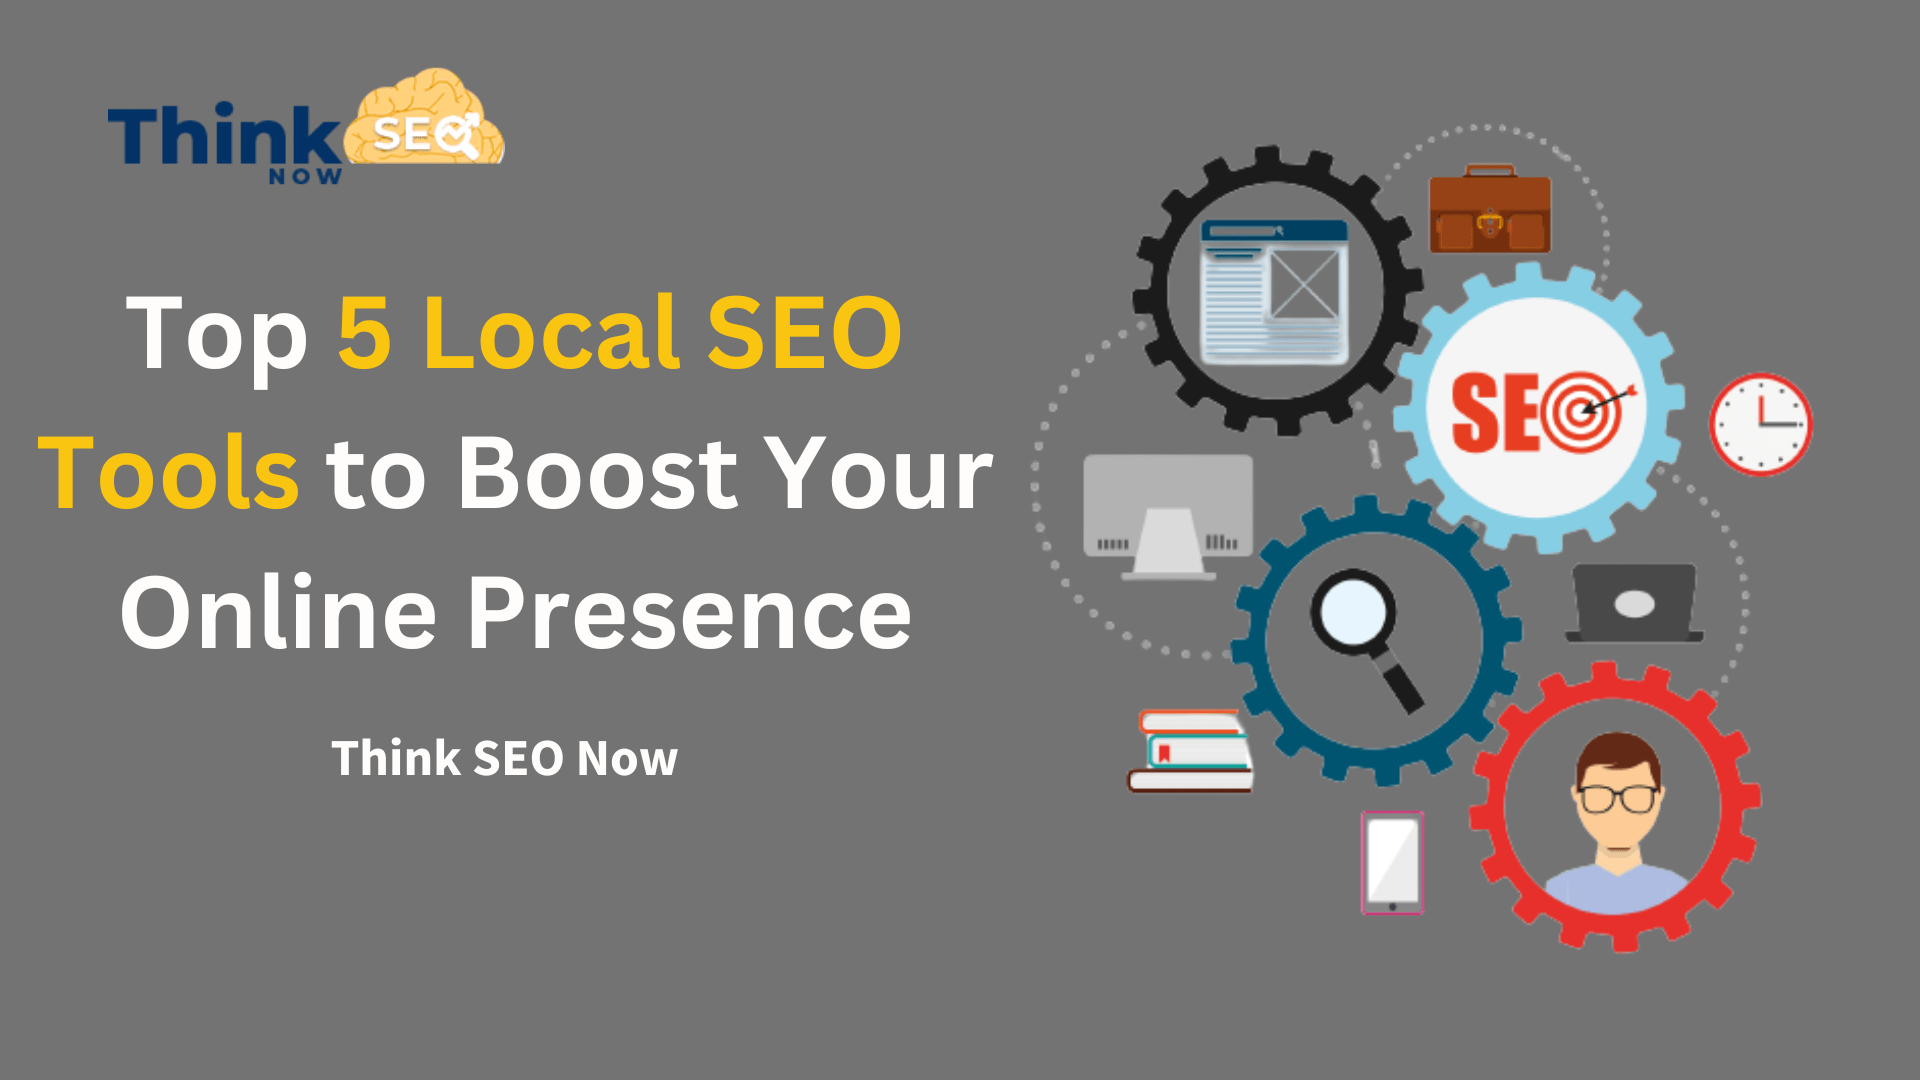 Top 5 Local SEO Tools to Boost Your Online Presence